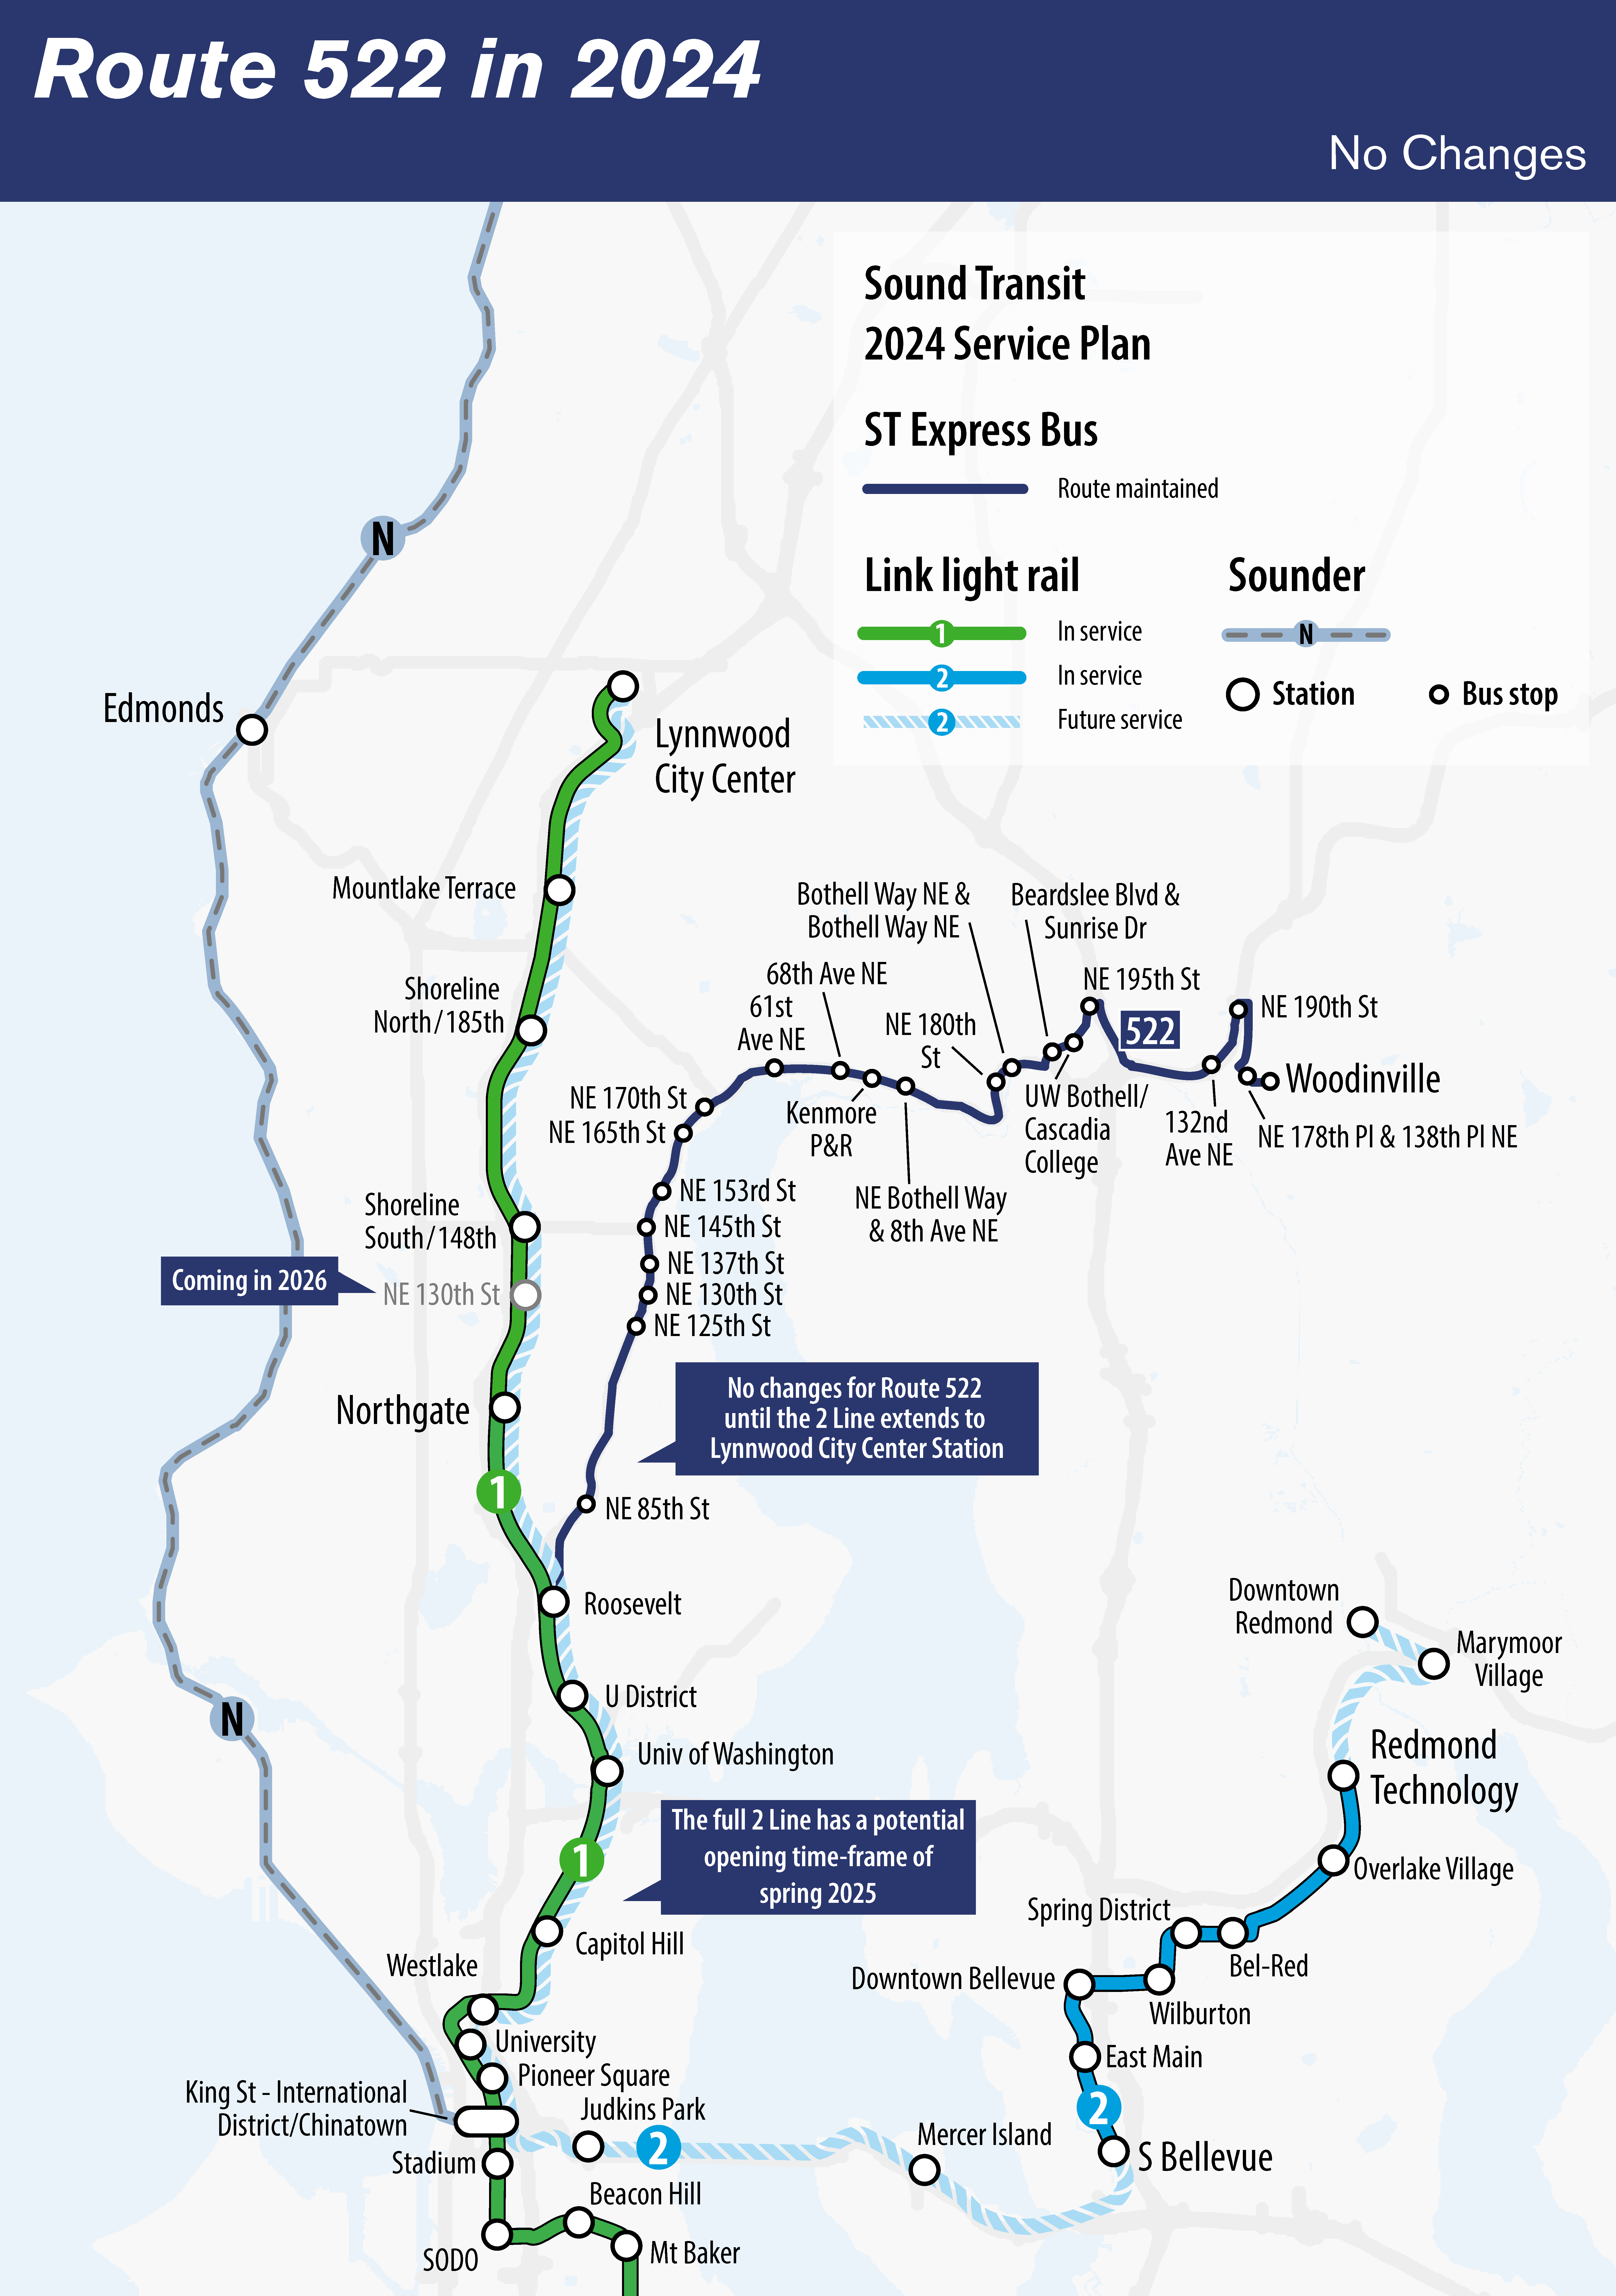 A map showing Express route 522 as it relates to Sound Transit's transit services in Seattle and the north and east subareas that include Everett, Seattle and Redmond. 


                The map shows Express route 522 in a strong dark blue line compared to other colored routes depicting Sounder train service, Link light rail service and other Express bus routes. 
                
                
                Express route 522 in dark blue is depicted as it currently runs from Woodinville to Roosevelt Station along Highway 522. There is no proposed change to Express route 522 service in 2024. However, this route will eventually be replaced by the Stride Bus Rapid Transit service.